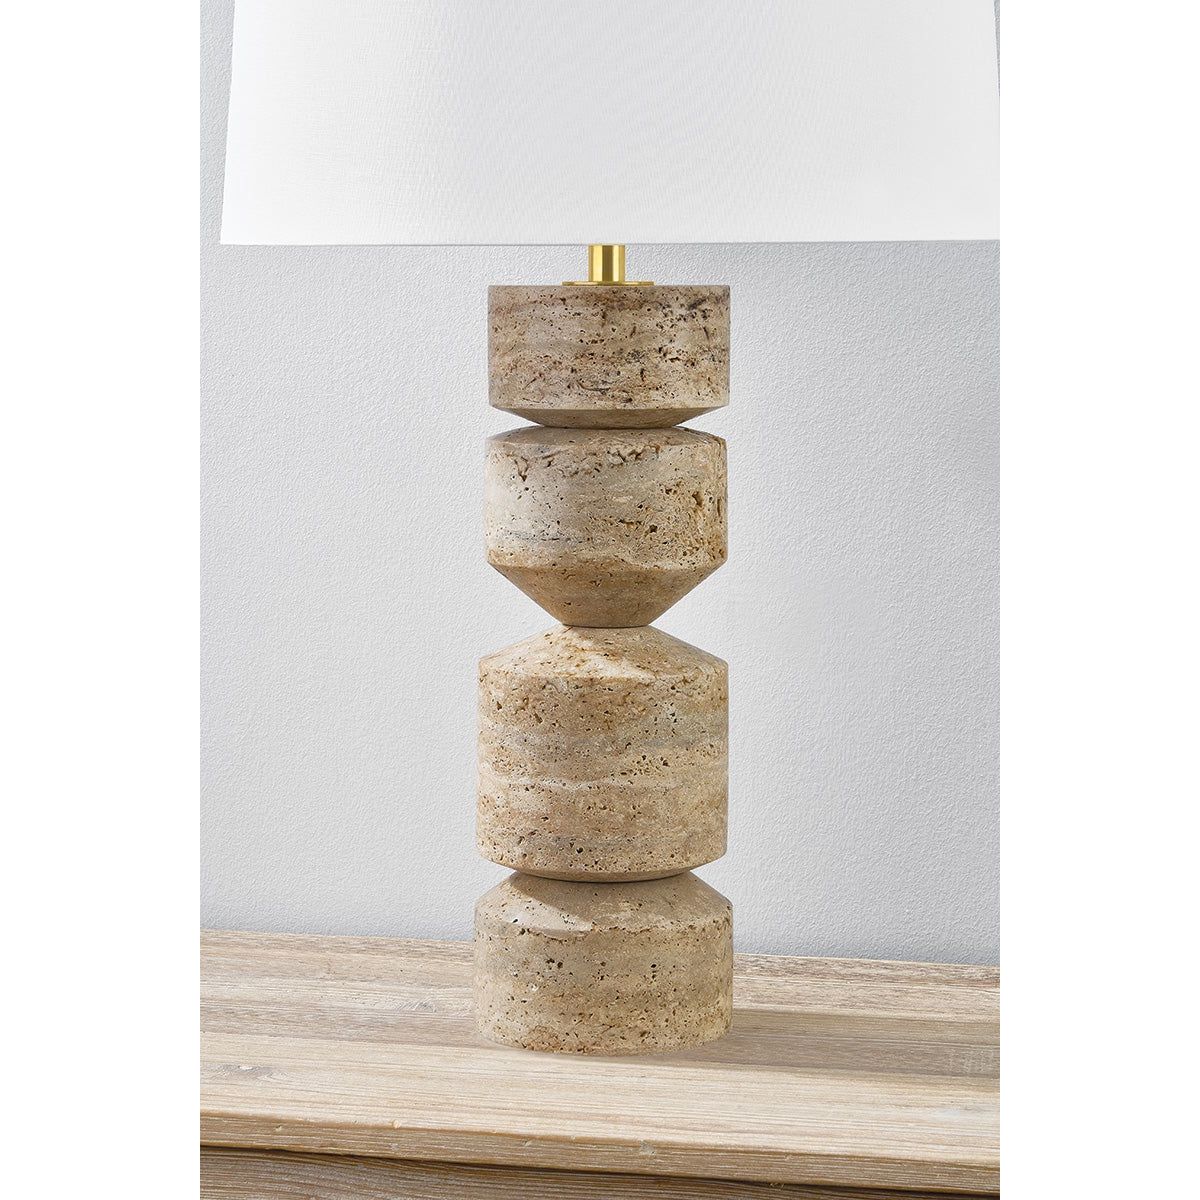 Galeville 1-Light Table Lamp